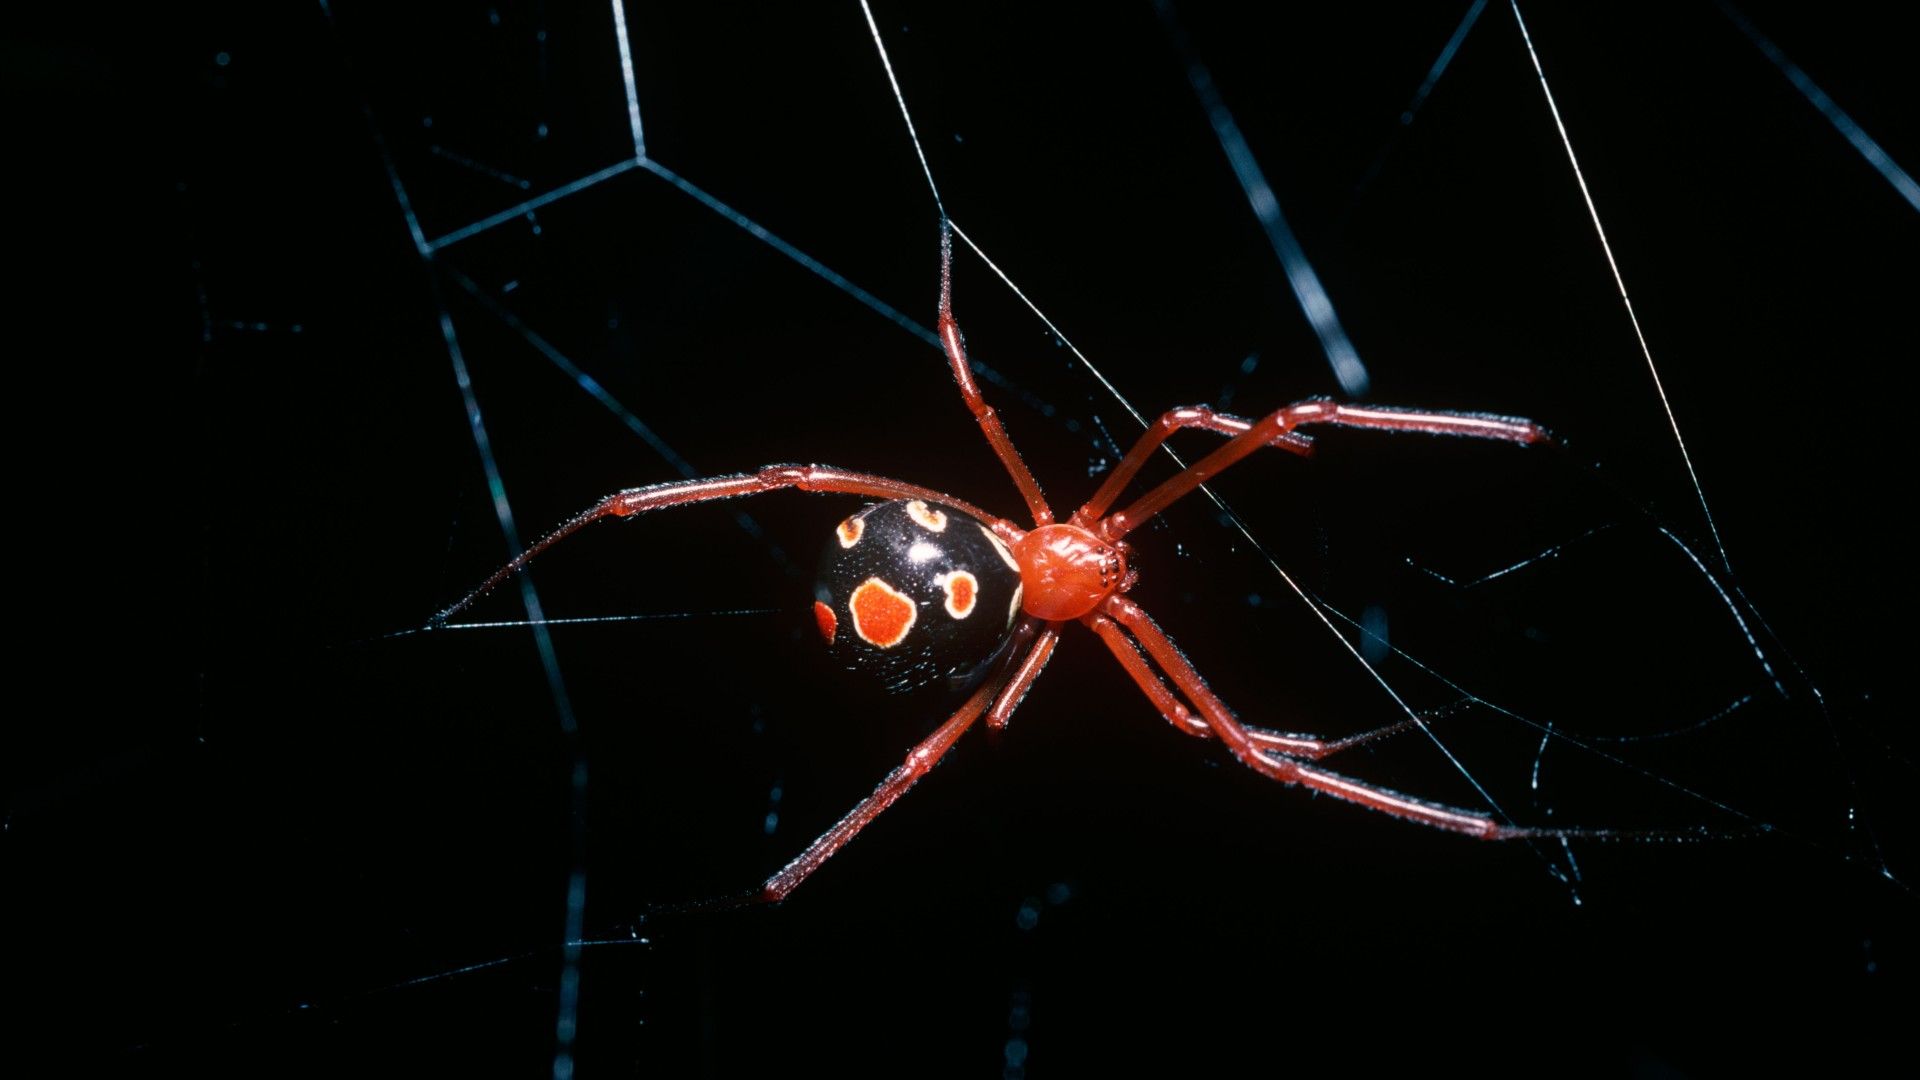 <p>                     Living mostly in sand dunes in Central and Southern Florida, the red widow spider (<em>Latrodectus bishop) </em>is another member of the notorious "widow" family. Their venom is just as lethal as brown and black widows, but as they live so far from human contact there has been no recorded bite in medical literature. The female red widow spider's venom is a neurotoxin which is thought to cause prolonged muscle spasms.                   </p>                                      <p>                     The red widow spider has a red-orange head and legs and a black abdomen with yellow rings around red dots. Rather than an hourglass marking like its "cousins," the red widow usually has one or two red marks.                   </p>